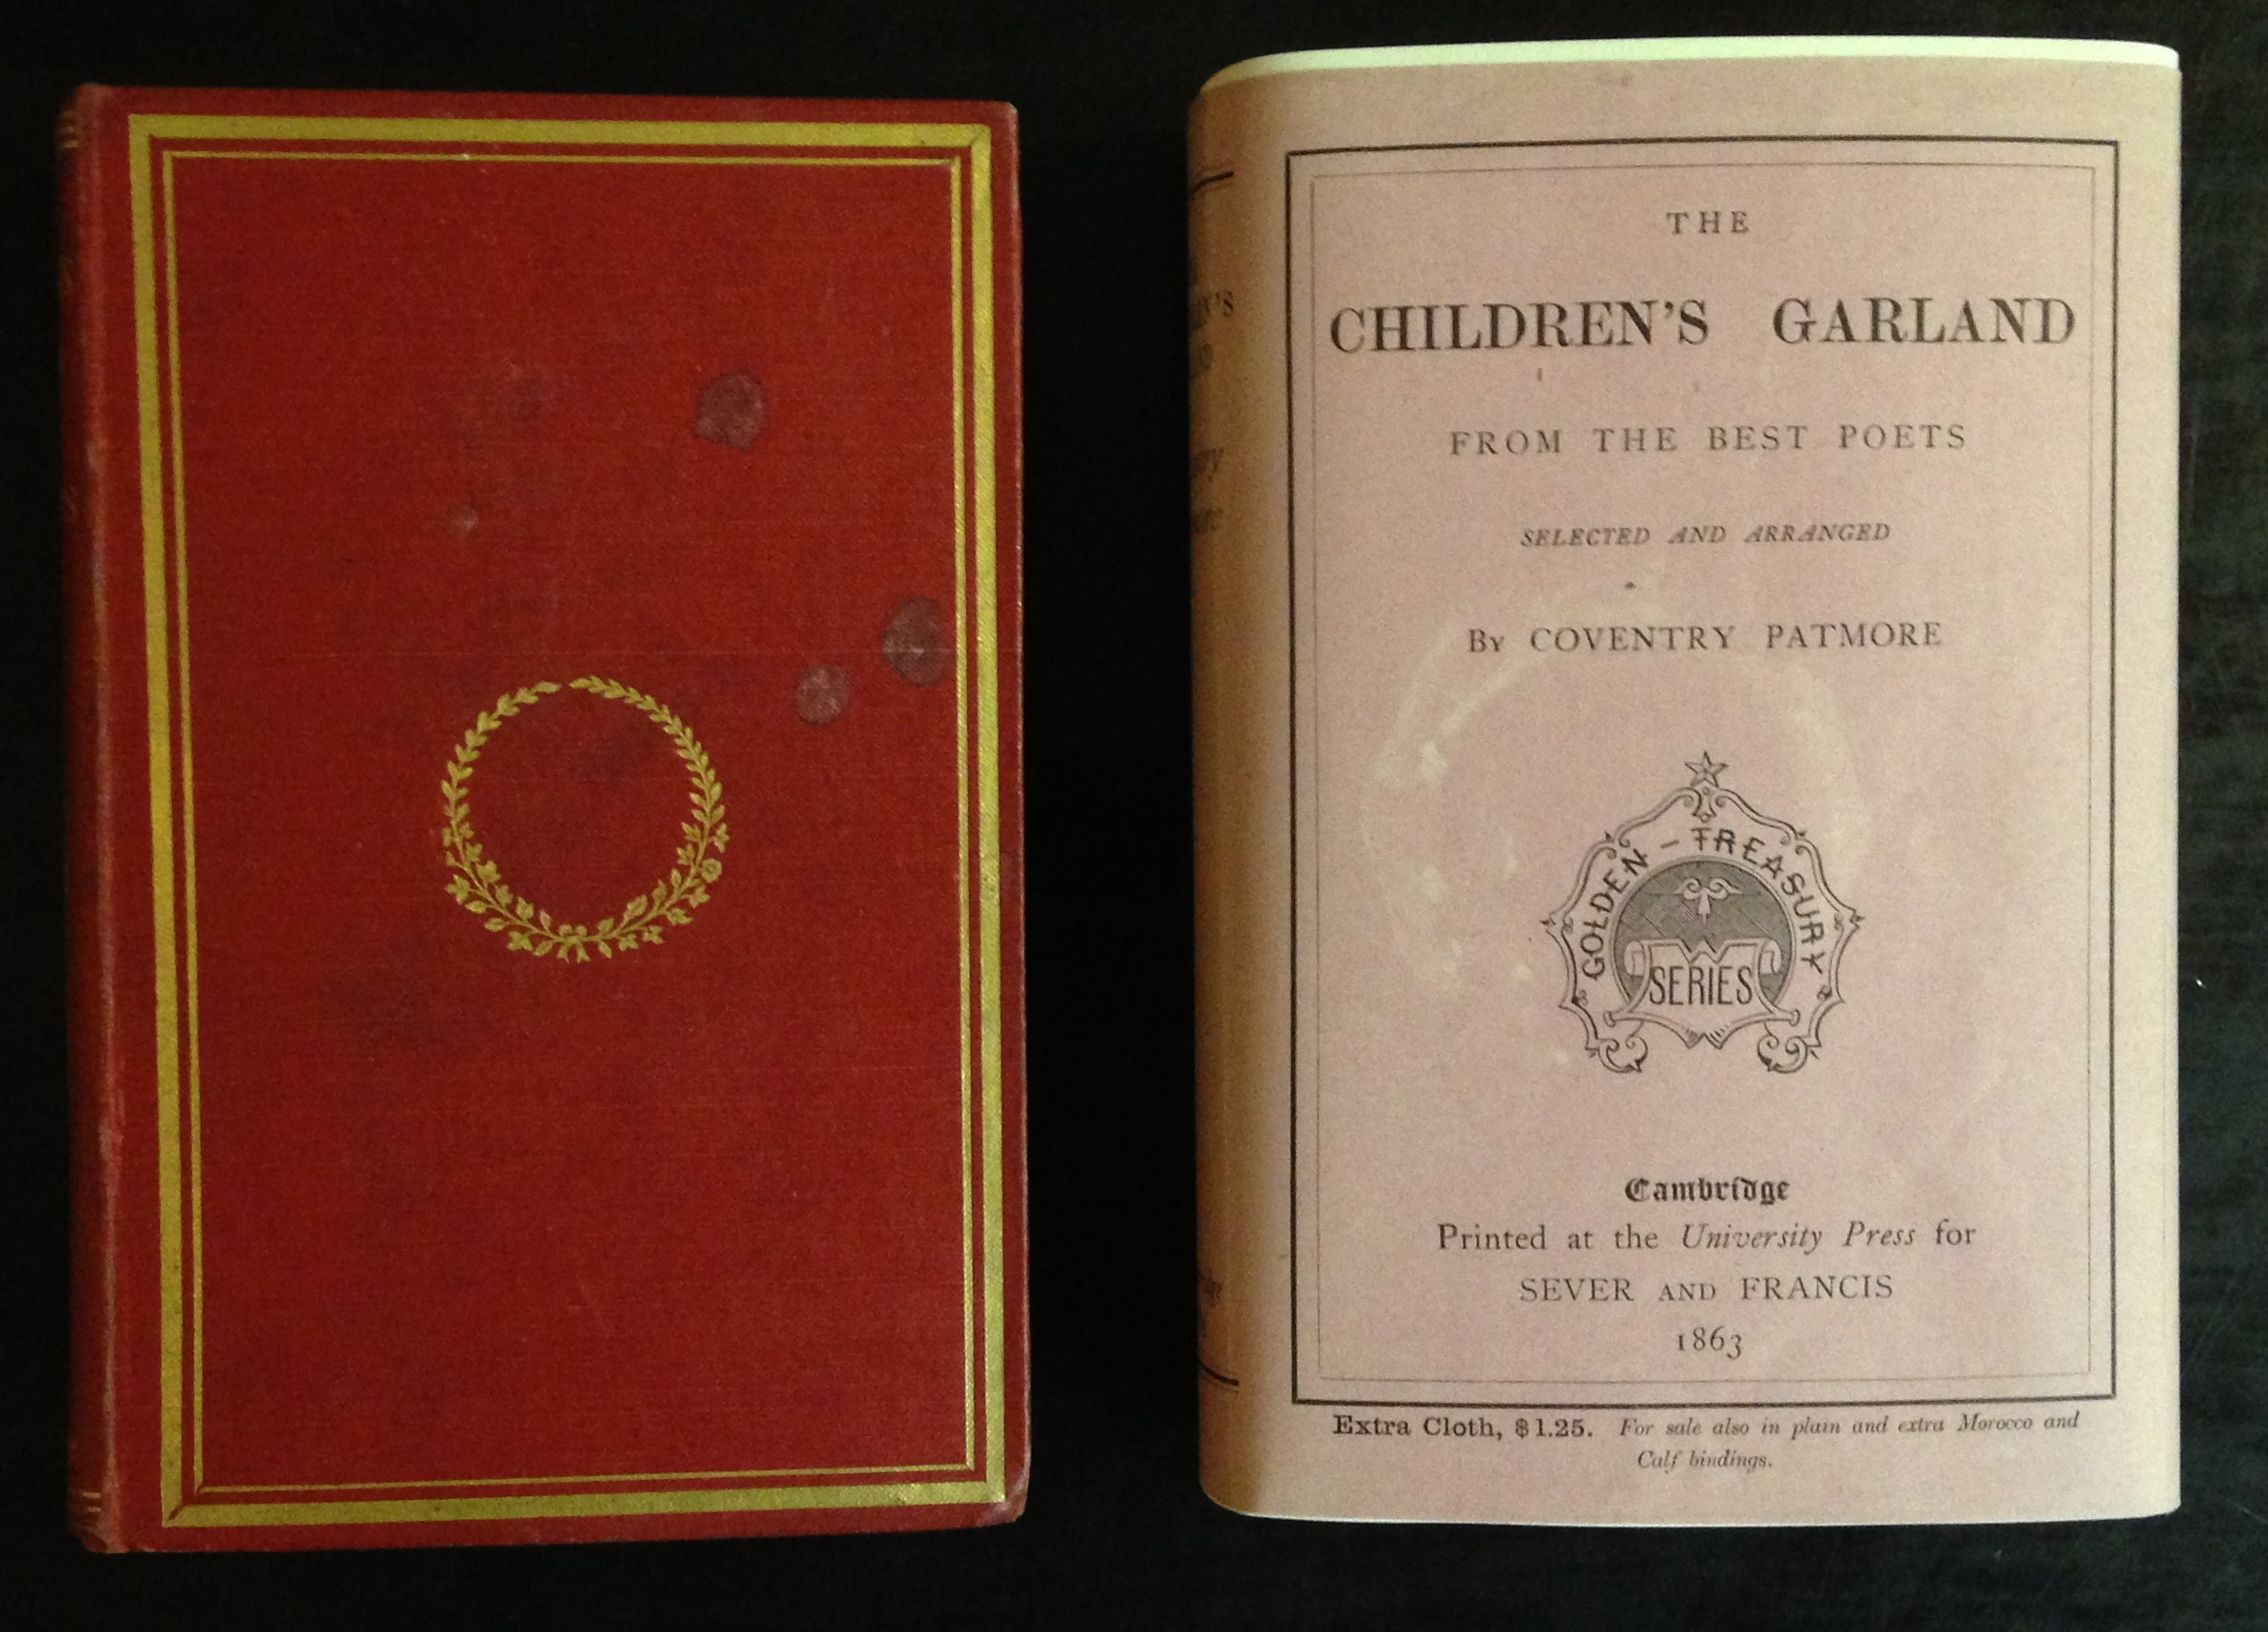 A fine example of one of the earliest surviving American dust jackets. The Children's Garland from the Best Poets (Cambridge, Mass.: Sever and Francis, 1863) was issued in several binding styles, as advertised on the front of the dust jacket; this copy is bound in "extra cloth" and was priced at $1.25. The fragile jacket is printed on the spine and front panel only, and it is in the form of a wrap-around band sealed on the reverse. This example was torn open rather than slipped off the book, but otherwise it has been carefully preserved.